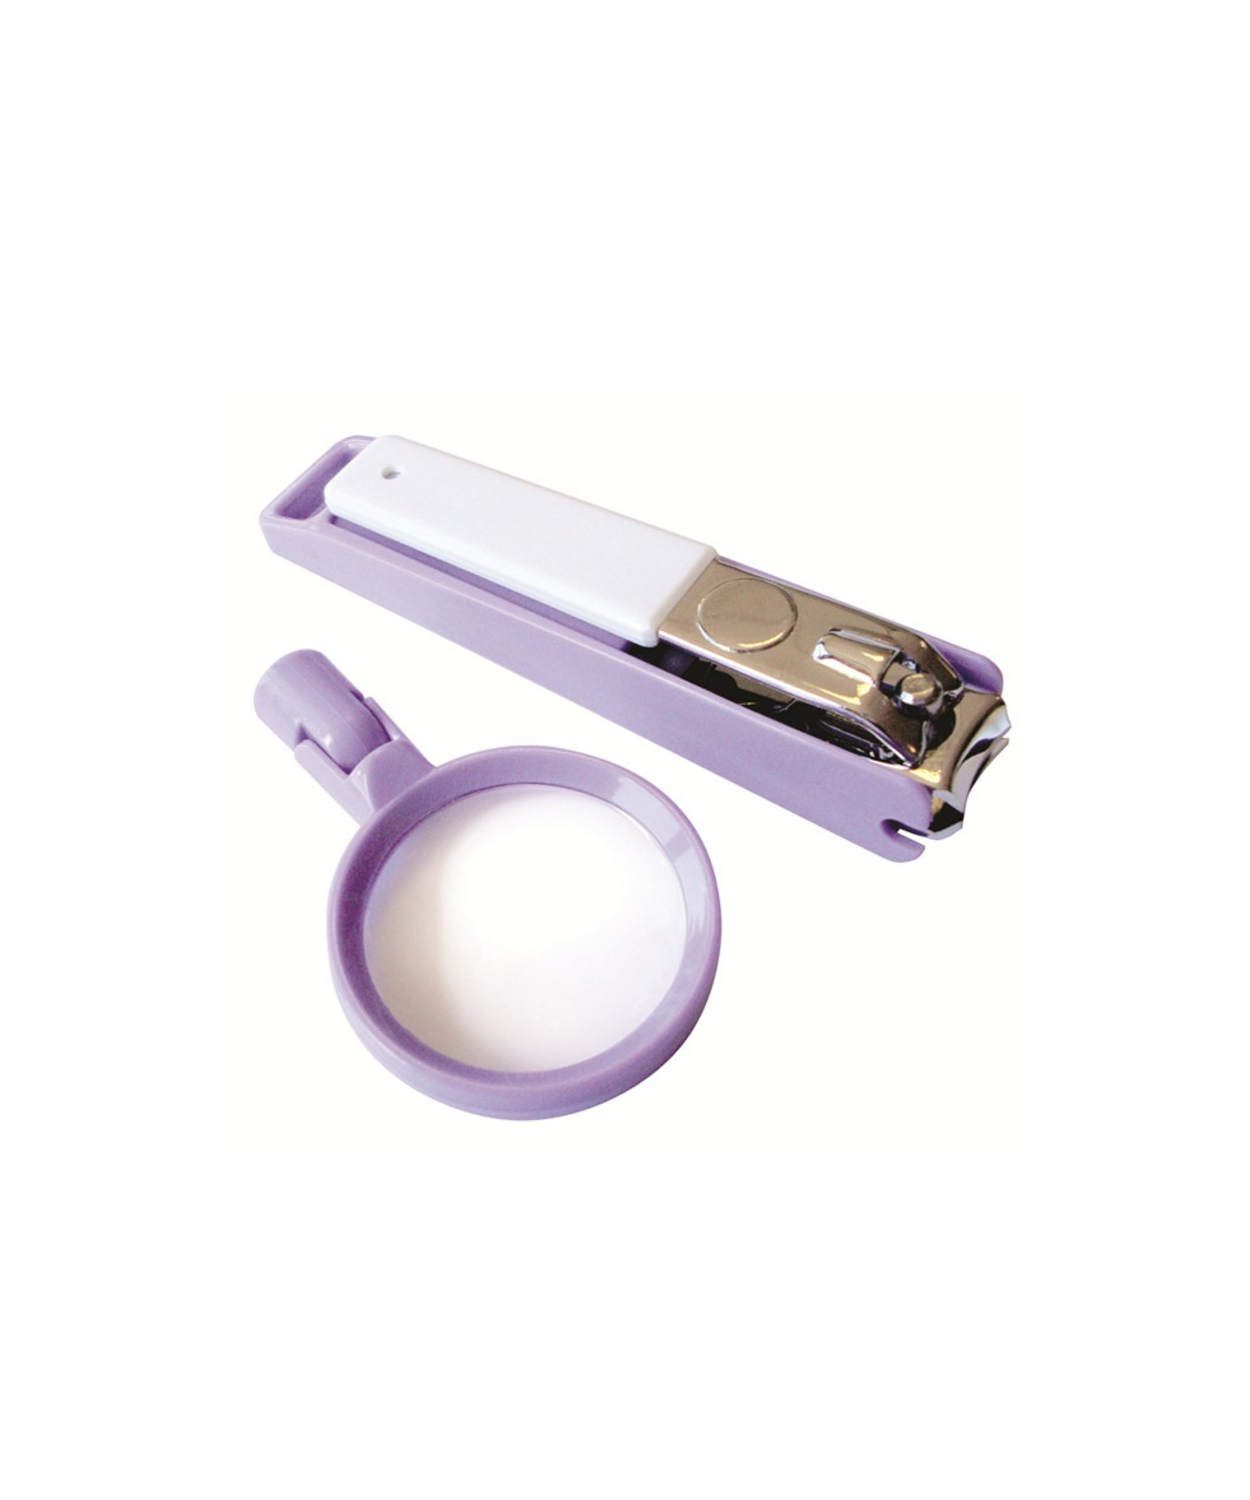 https://www.risemobility.co.uk/wp-content/uploads/2023/01/nail-clipper-removable-magnifier.jpg